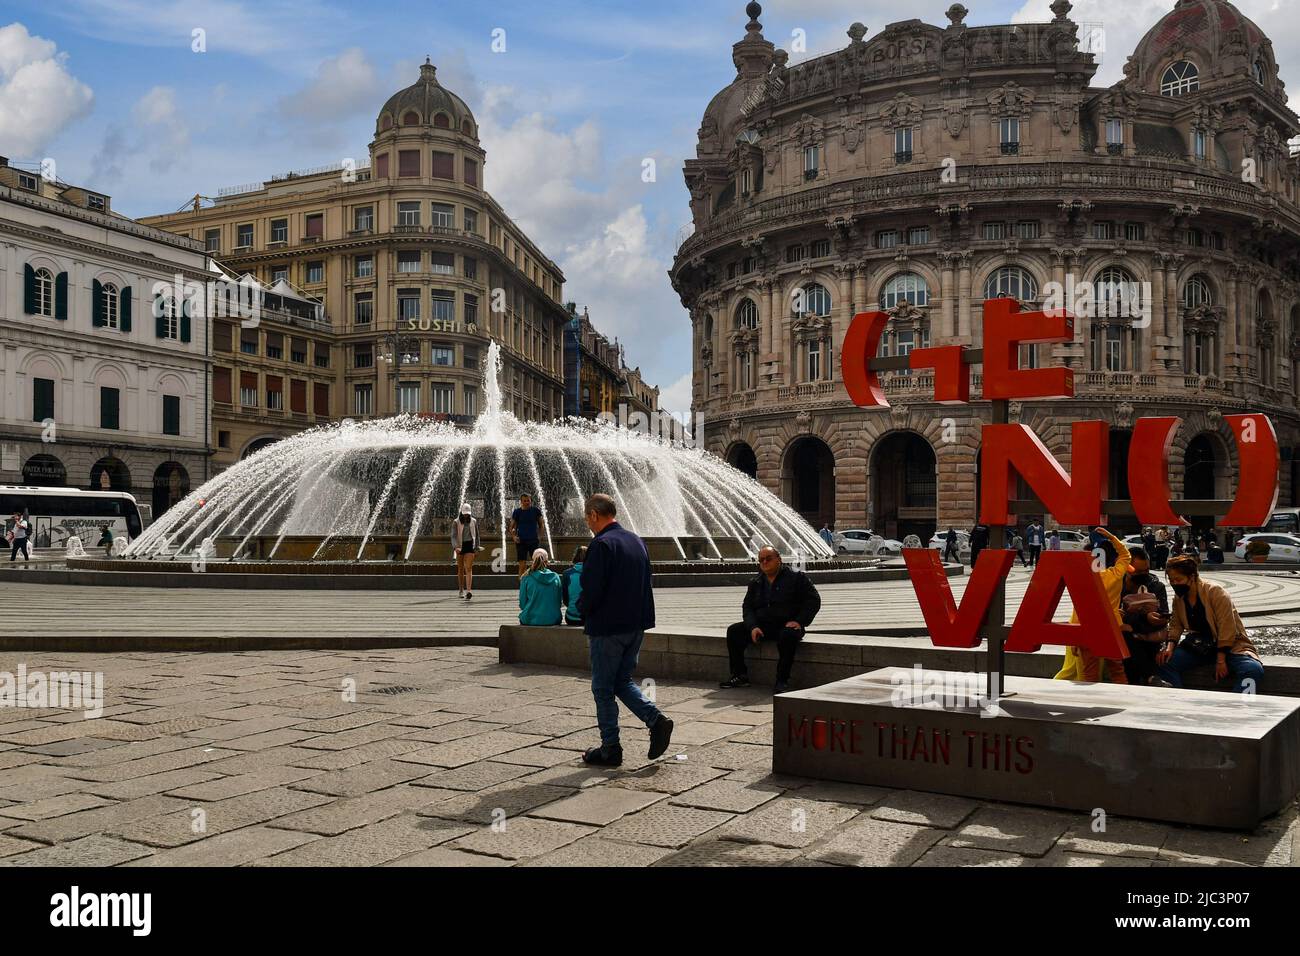 Piazza De Ferrari with the city logo, the fountain and the Stock Exchange Palace in the background, Genoa, Liguria, Italy Stock Photo